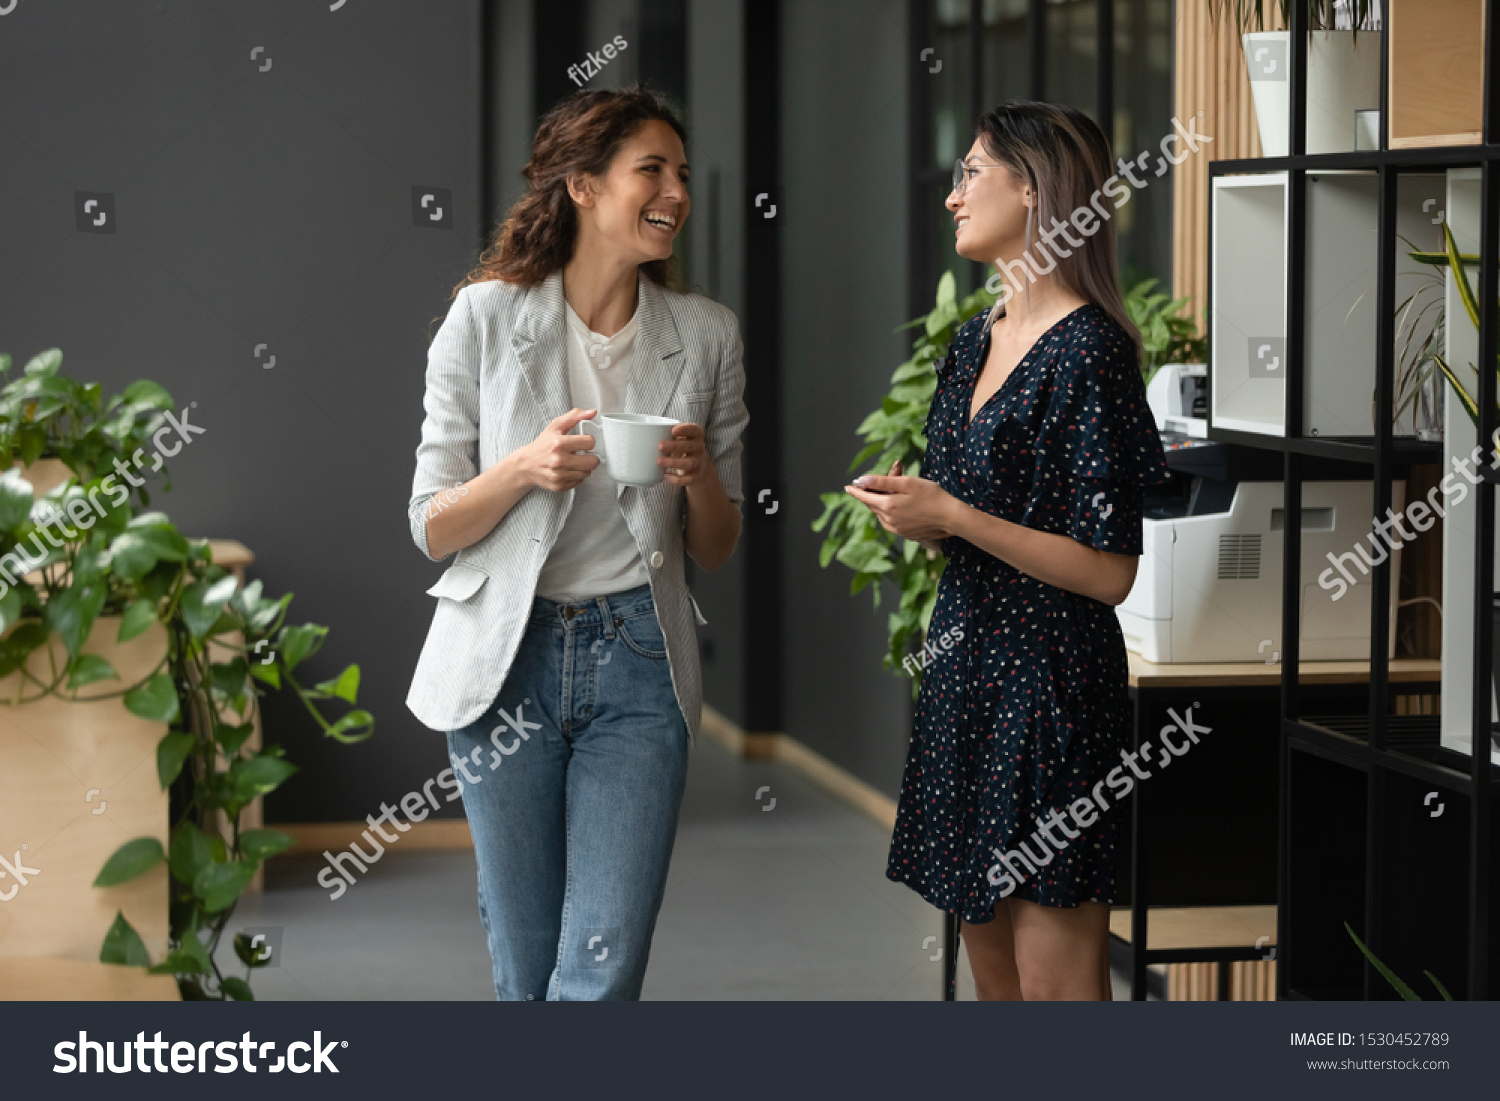 Asian and Caucasian ethnicity women colleagues met in office hall chatting enjoy friendly warm conversation, multi-ethnic mates having informal talk drink tea or coffee take break distracted from work #1530452789